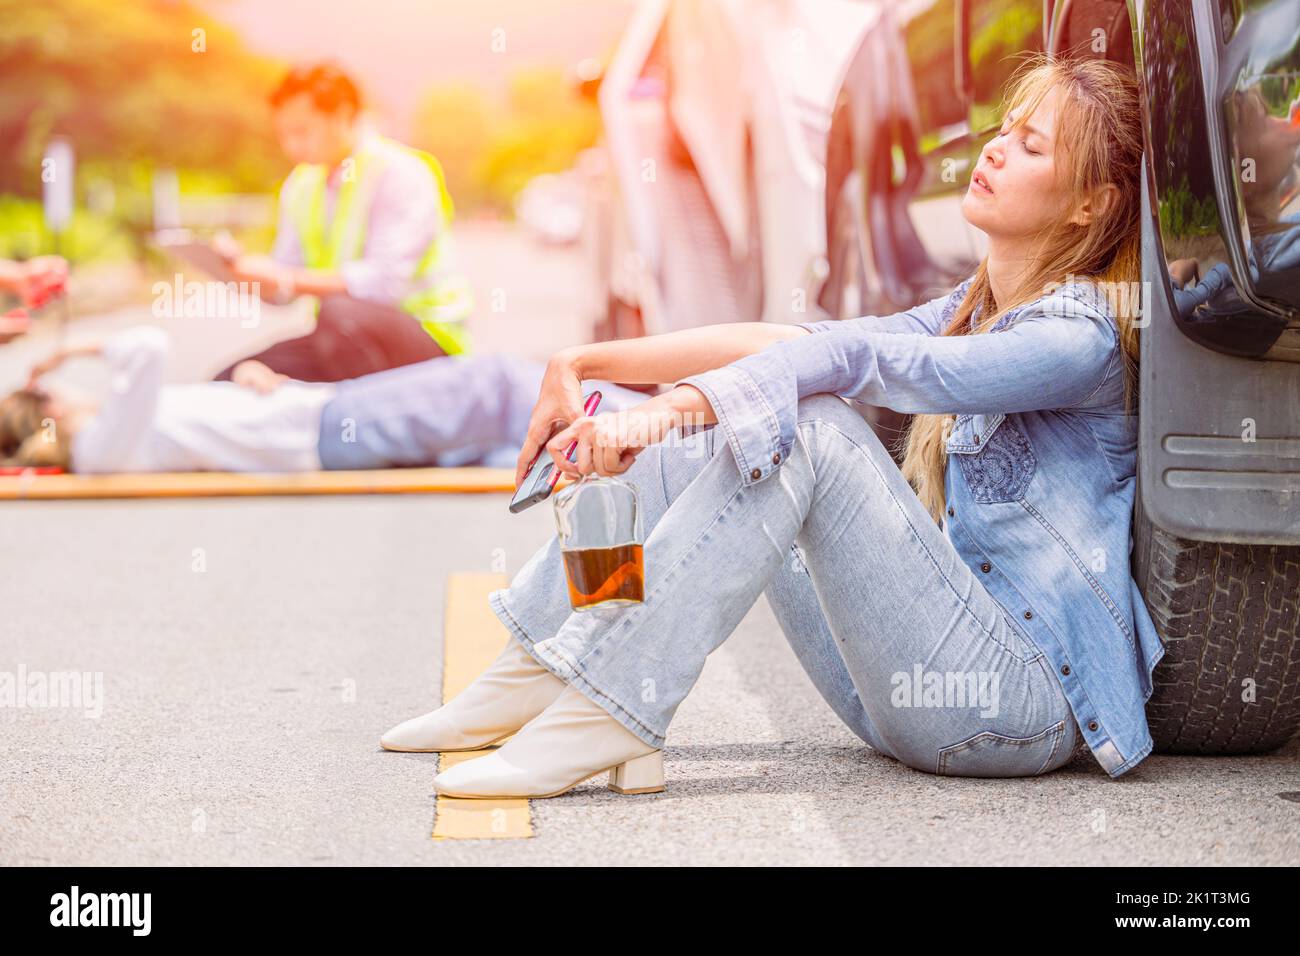 women teen drunk drink alcohol during drive a car accident at roadside sitting sleep unconscious Stock Photo